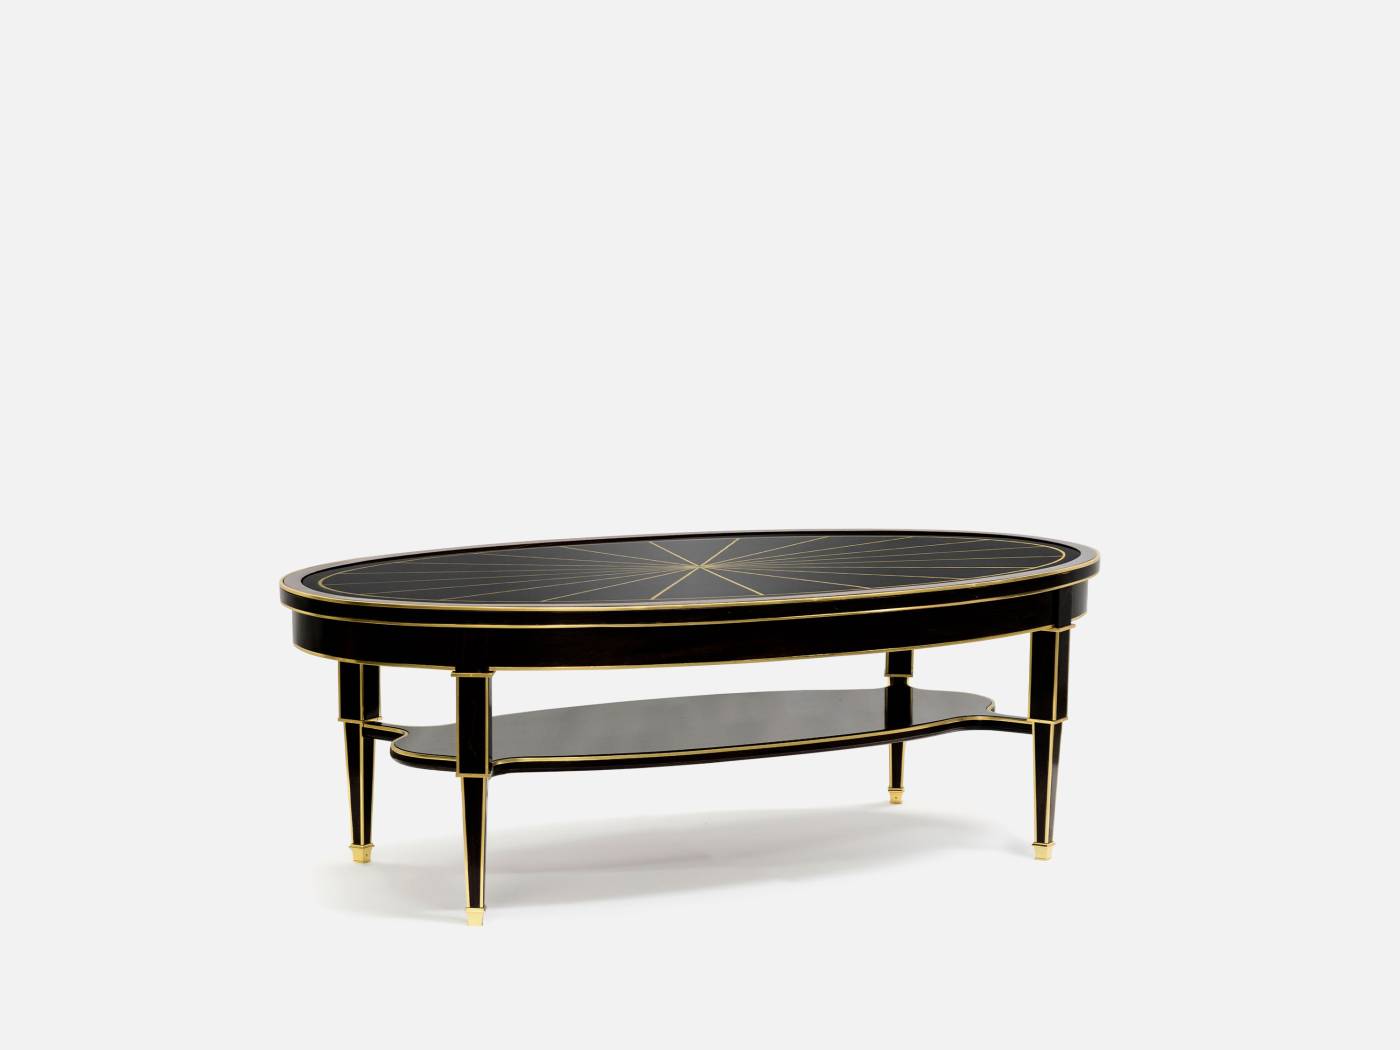 ART. 2219 – Discover the elegance of luxury classic Small tables made in Italy by C.G. Capelletti. Luxury classic furniture that combines style and craftsmanship.